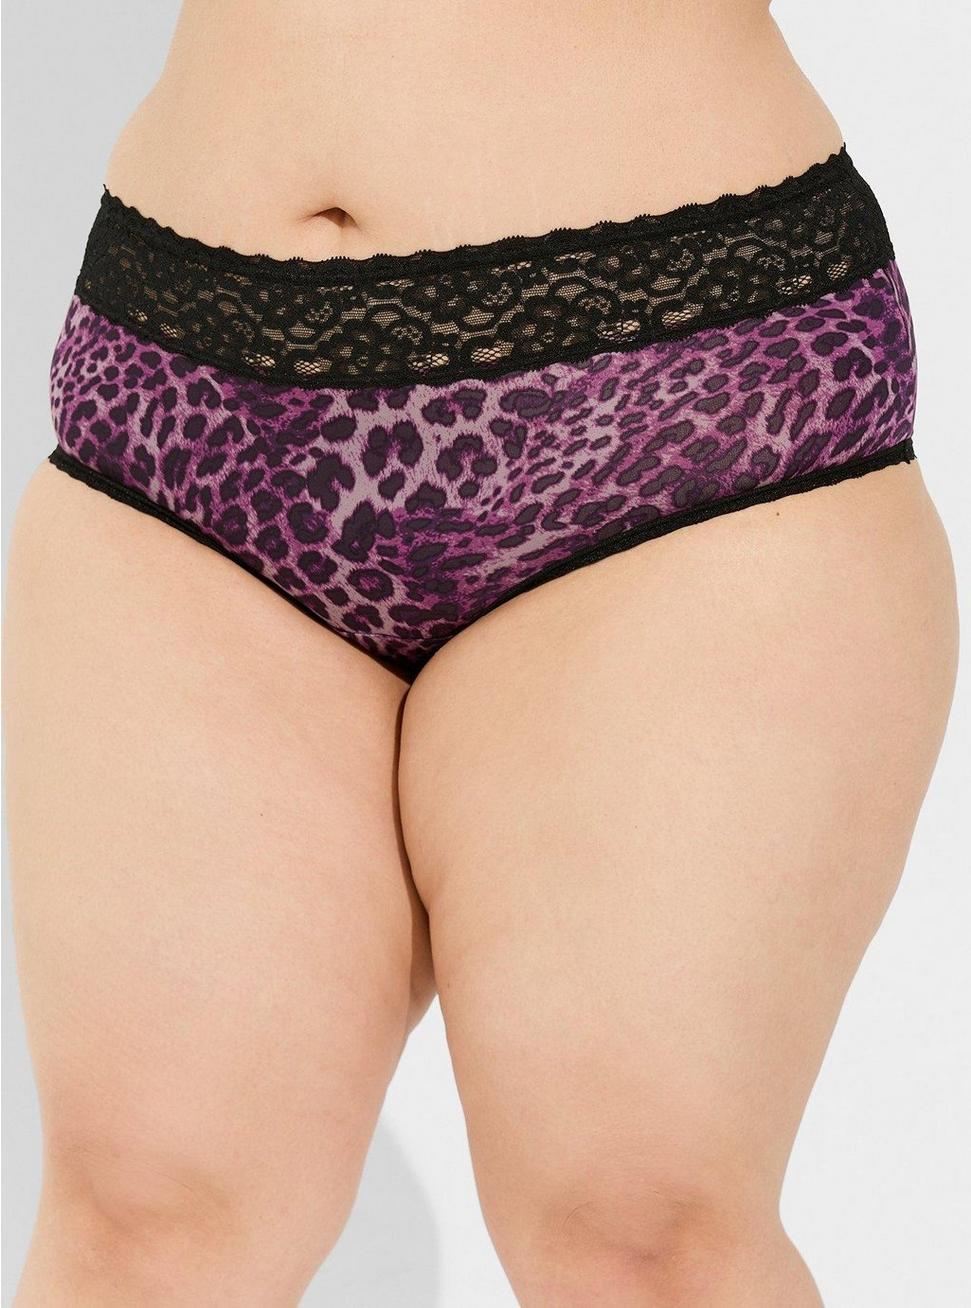 Second Skin Mid-Rise Cheeky Lace Trim Panty, CLASSIC LEOPARD GRAPE ROYALE, alternate